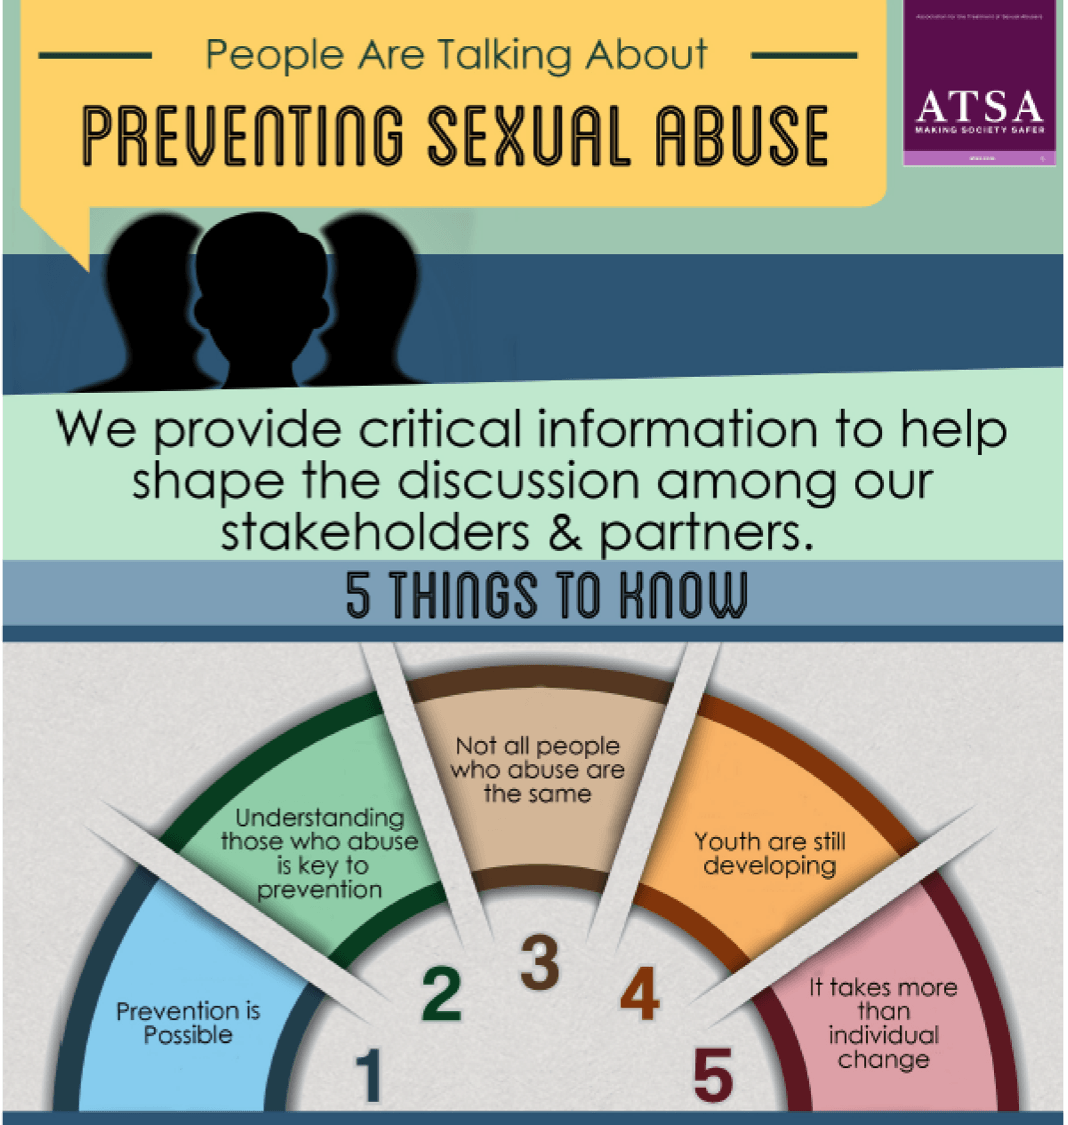 5 Things To Know About Preventing Sexual Violence 1269